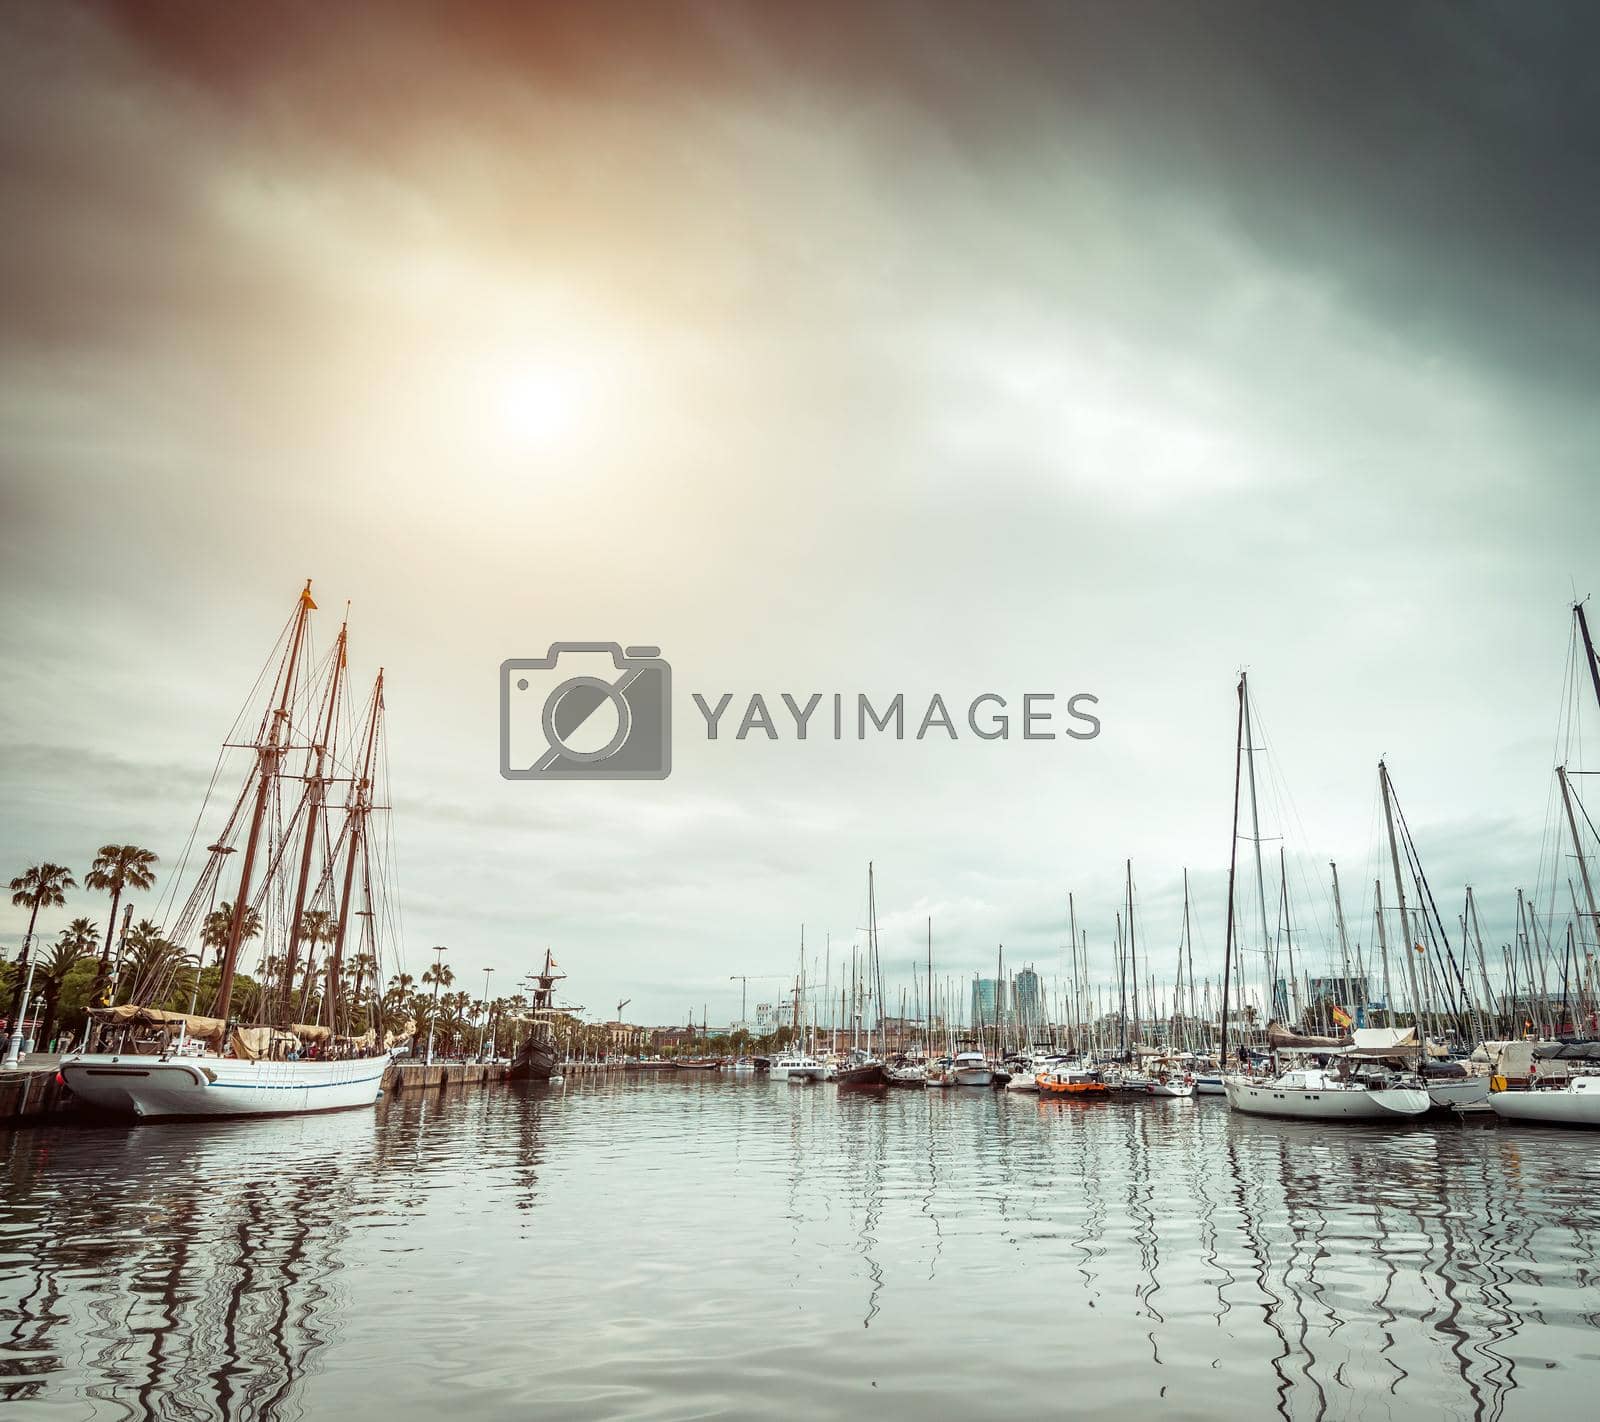 Royalty free image of yachts in the port by tan4ikk1